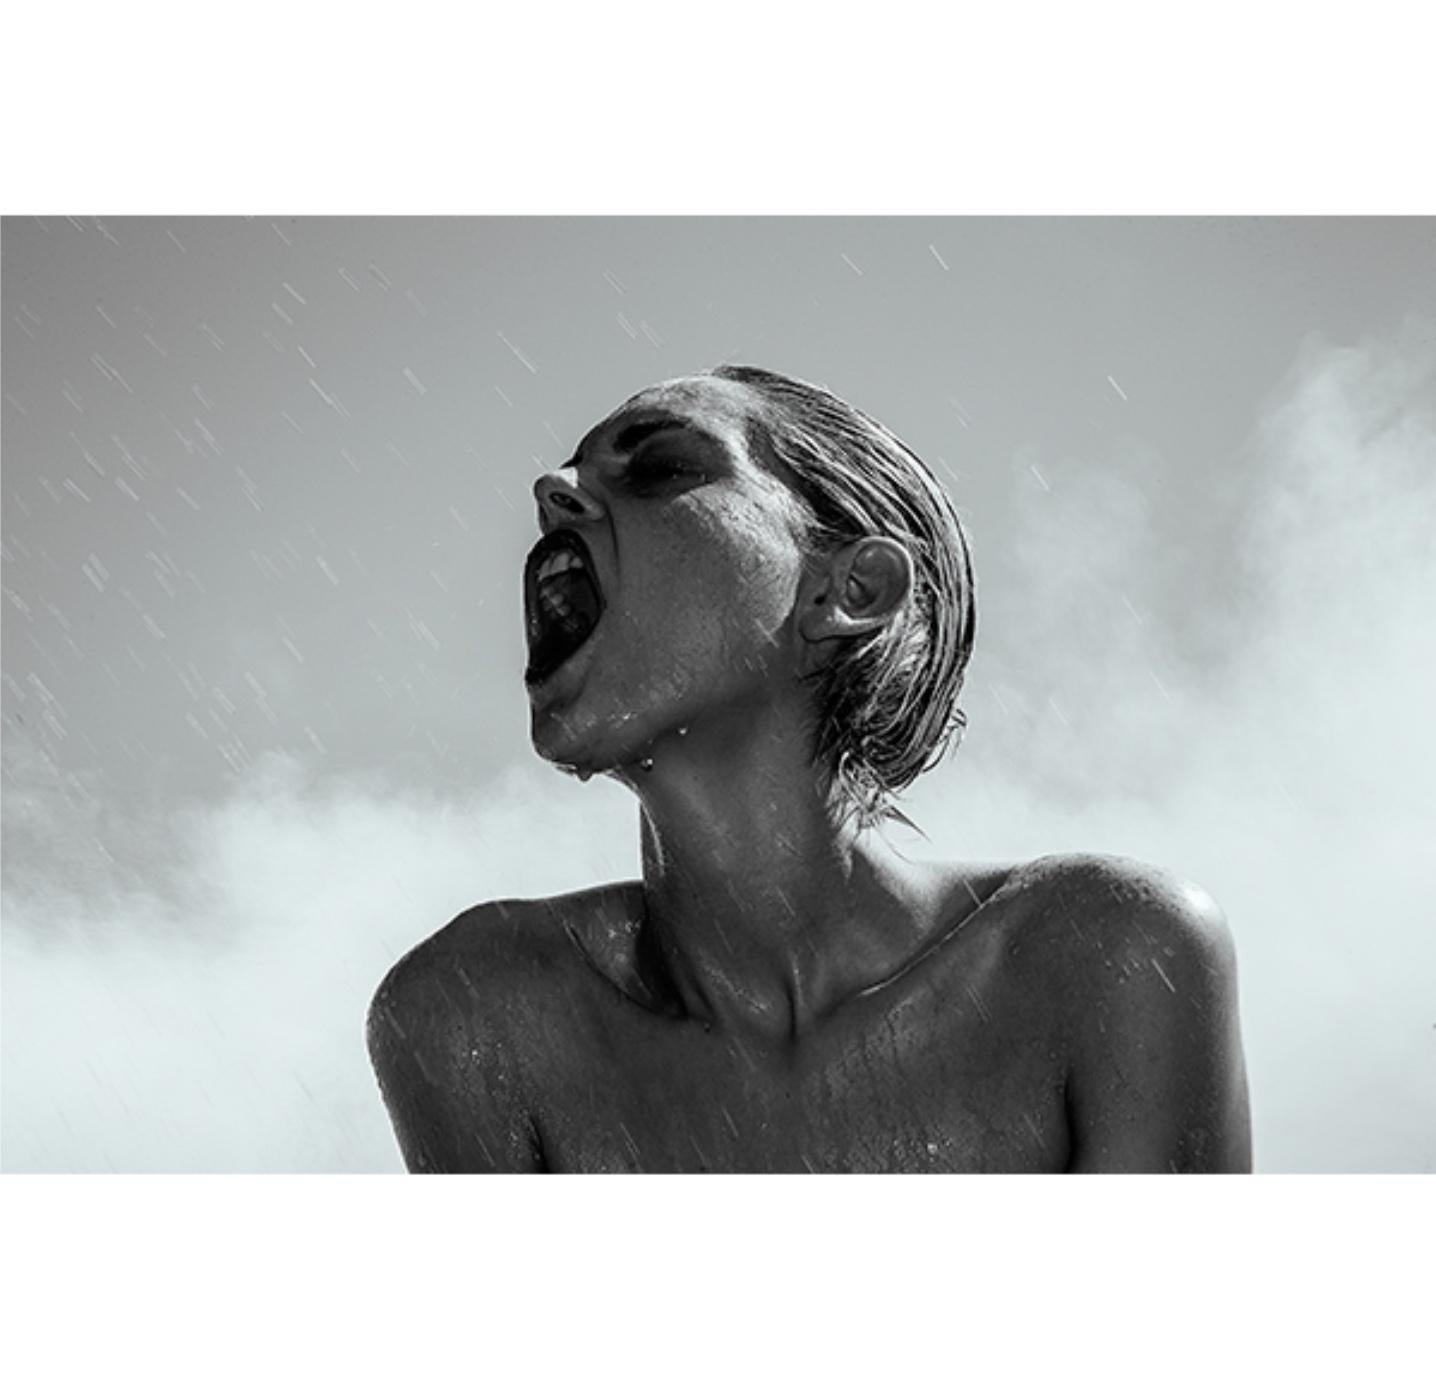 Tyler Shields - Pouring Rain, photographie 2014